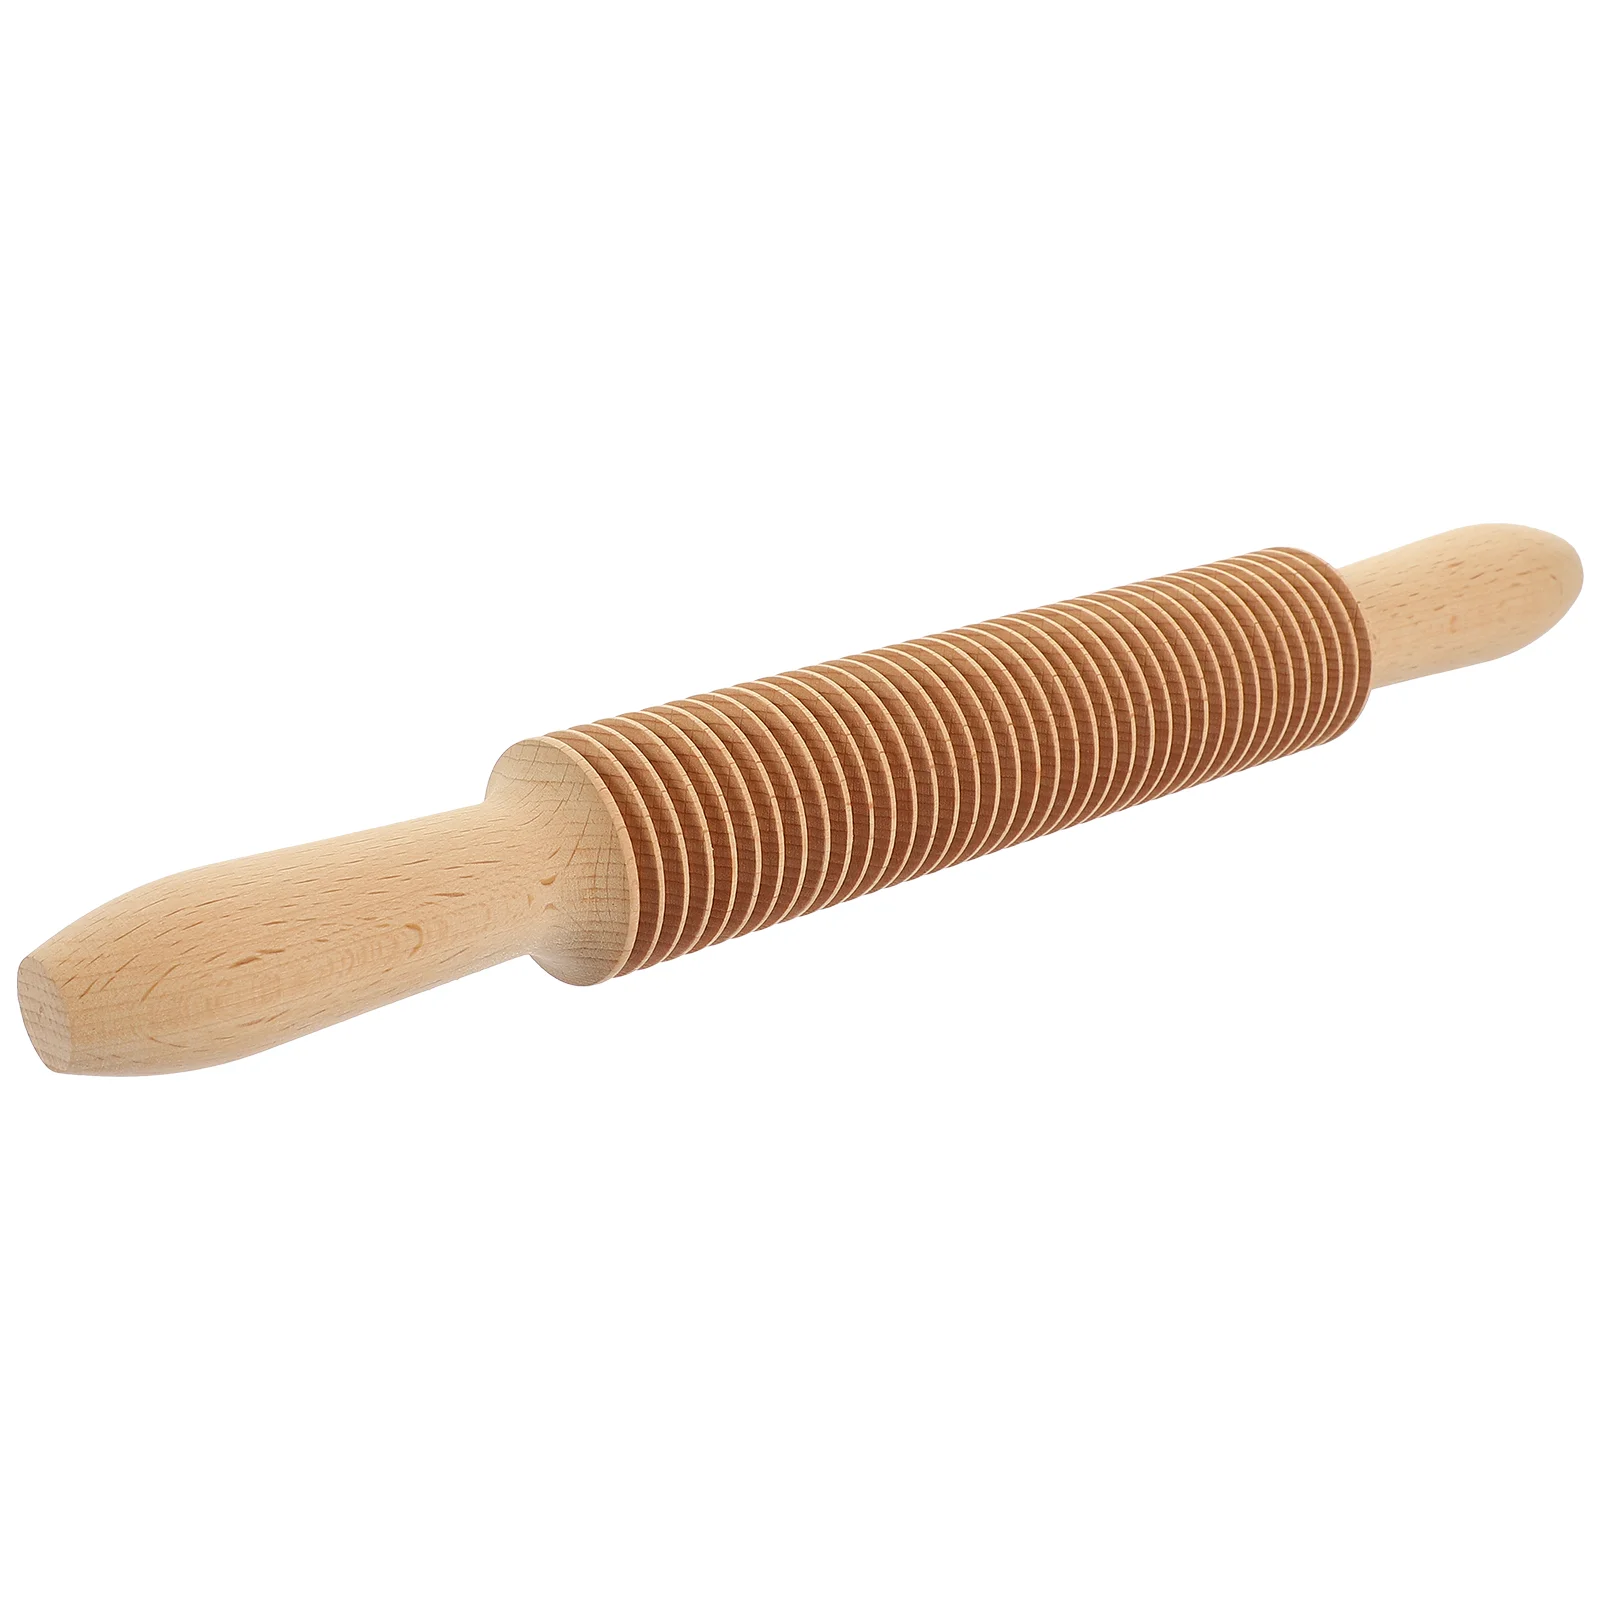 

Wooden Rolling Pin Noodle Lattice Roller Dough Cutter Spaghetti Pasta Maker Pastry Vegetable Rolling Slicer Kitchen Cooking Tool